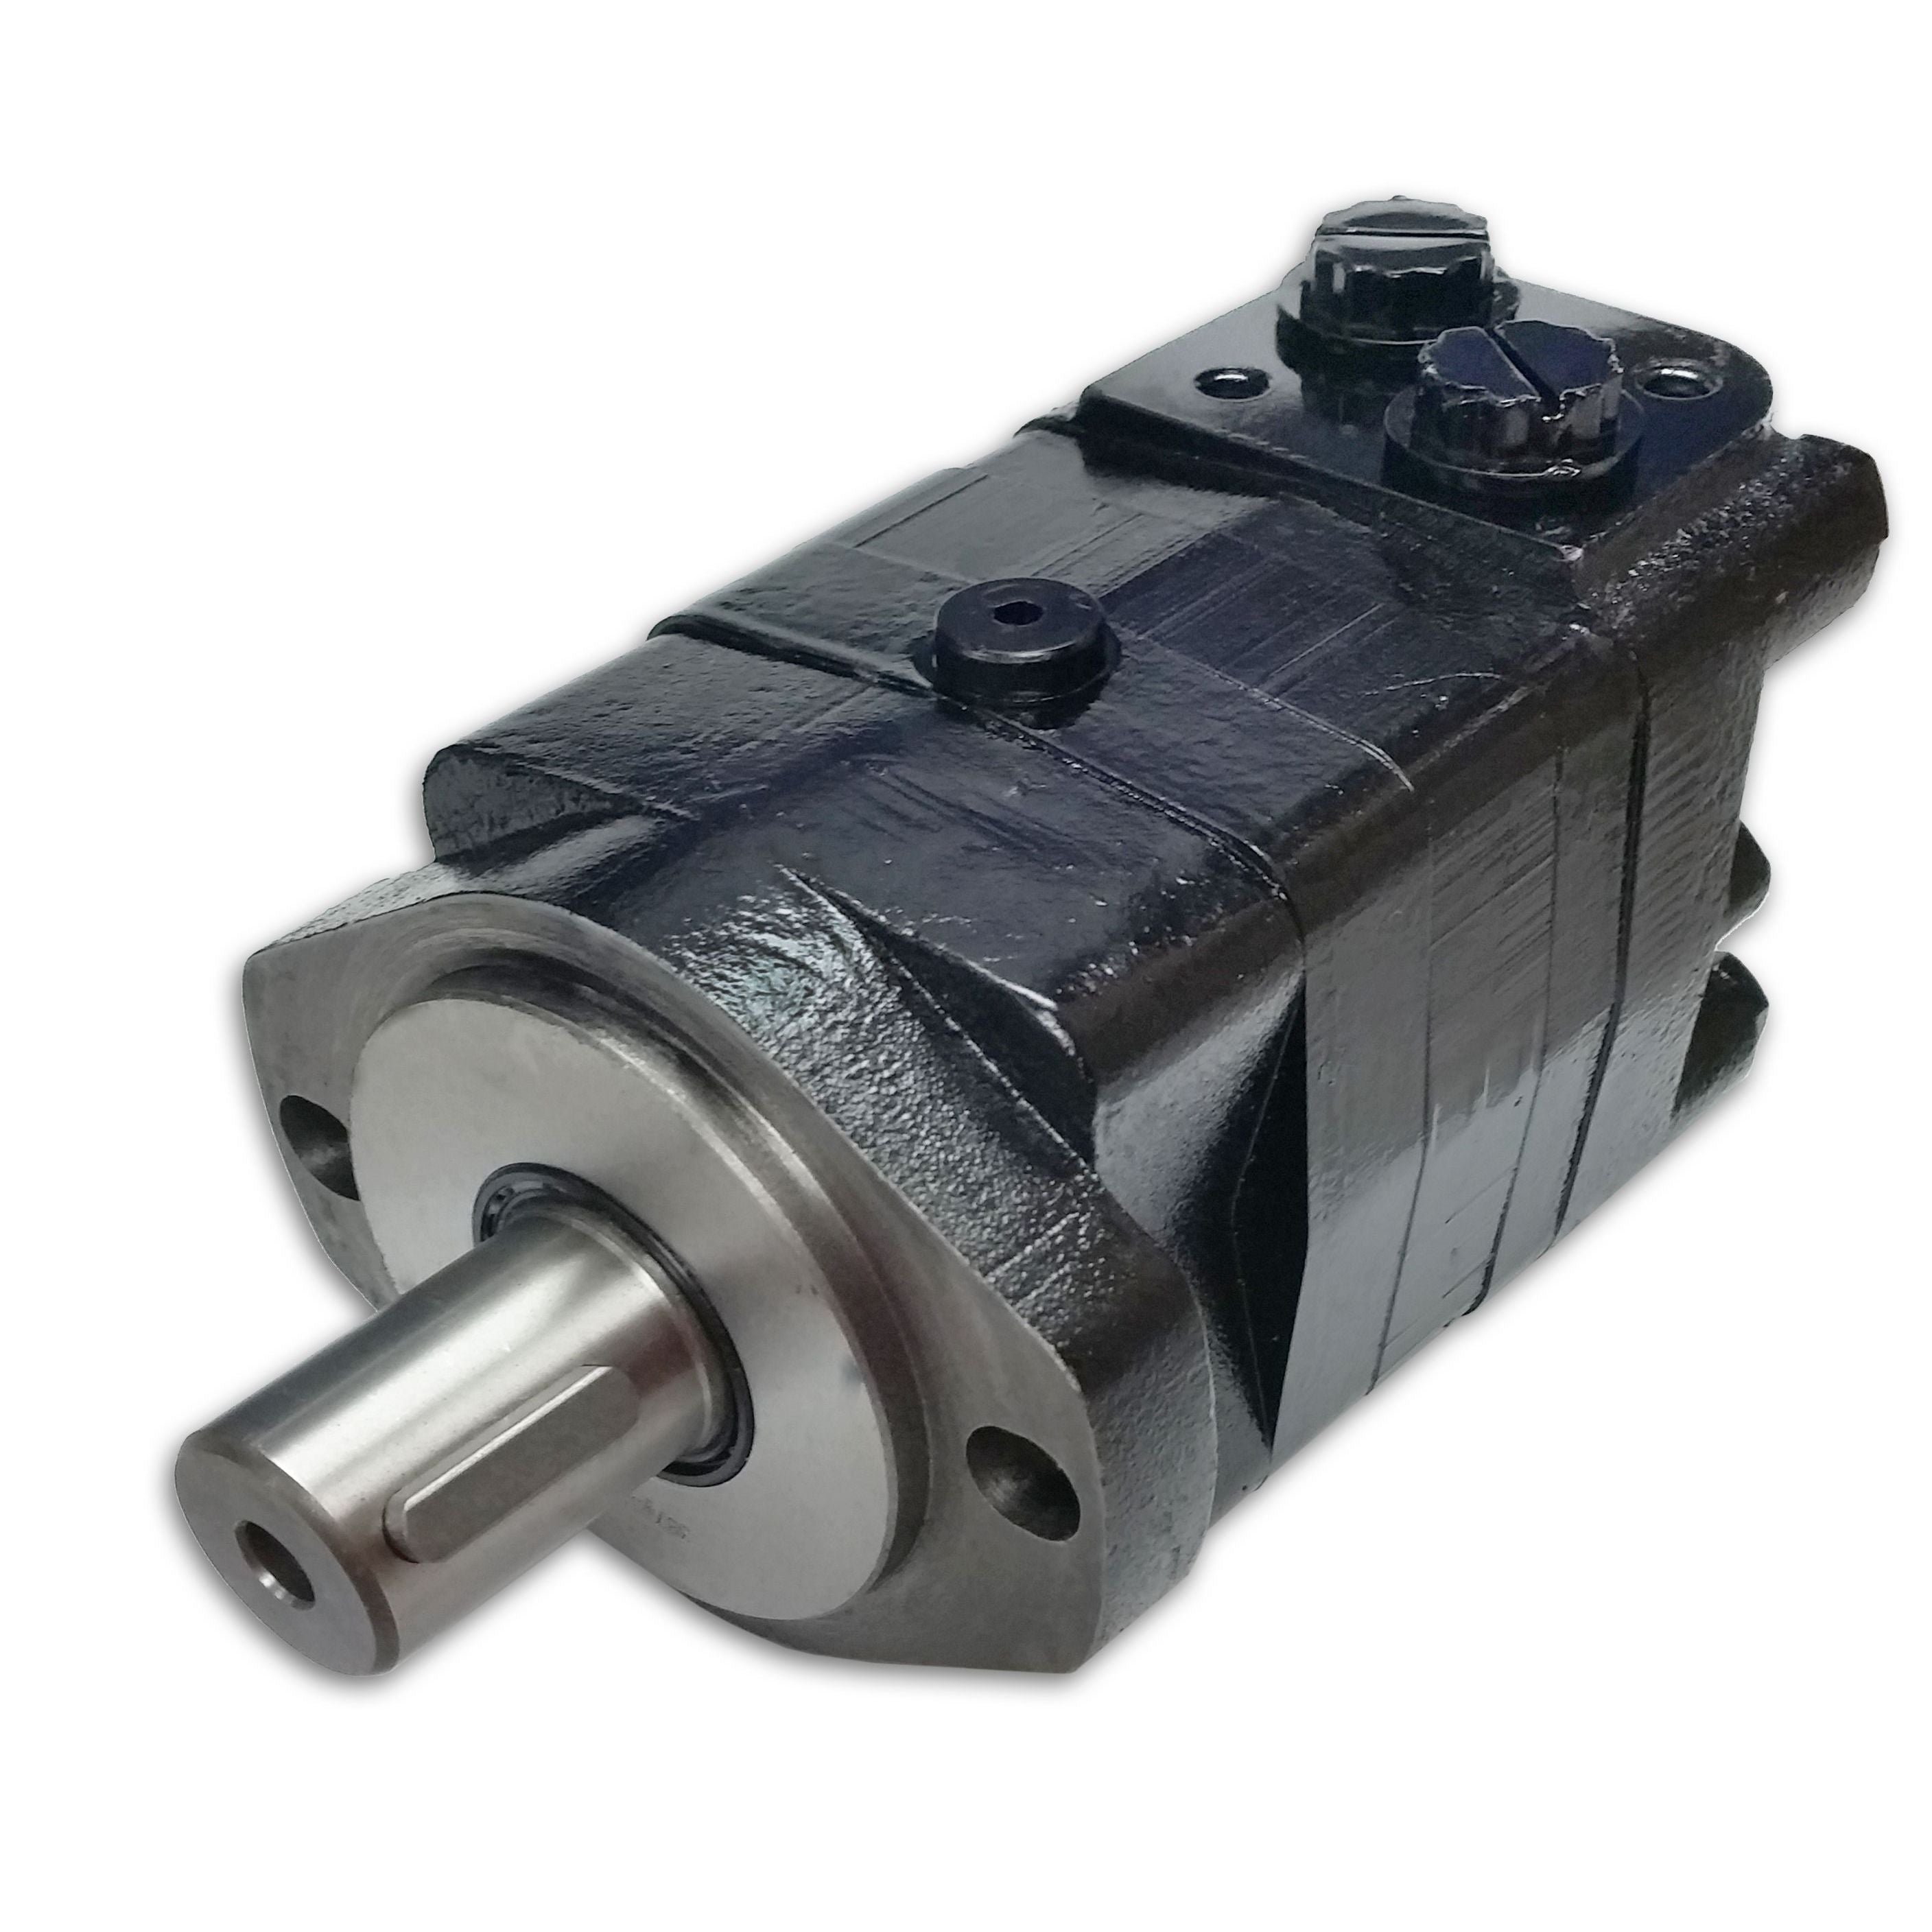 BMSY-200-E2-G-S : Dynamic LSHT Motor, 194cc, 375RPM, 5185in-lb, 3045psi Differential, 19.81GPM, SAE A 2-Bolt Mount, 1.25" Bore x 5/16" Key Shaft, Side Ported, #10 SAE (5/8")